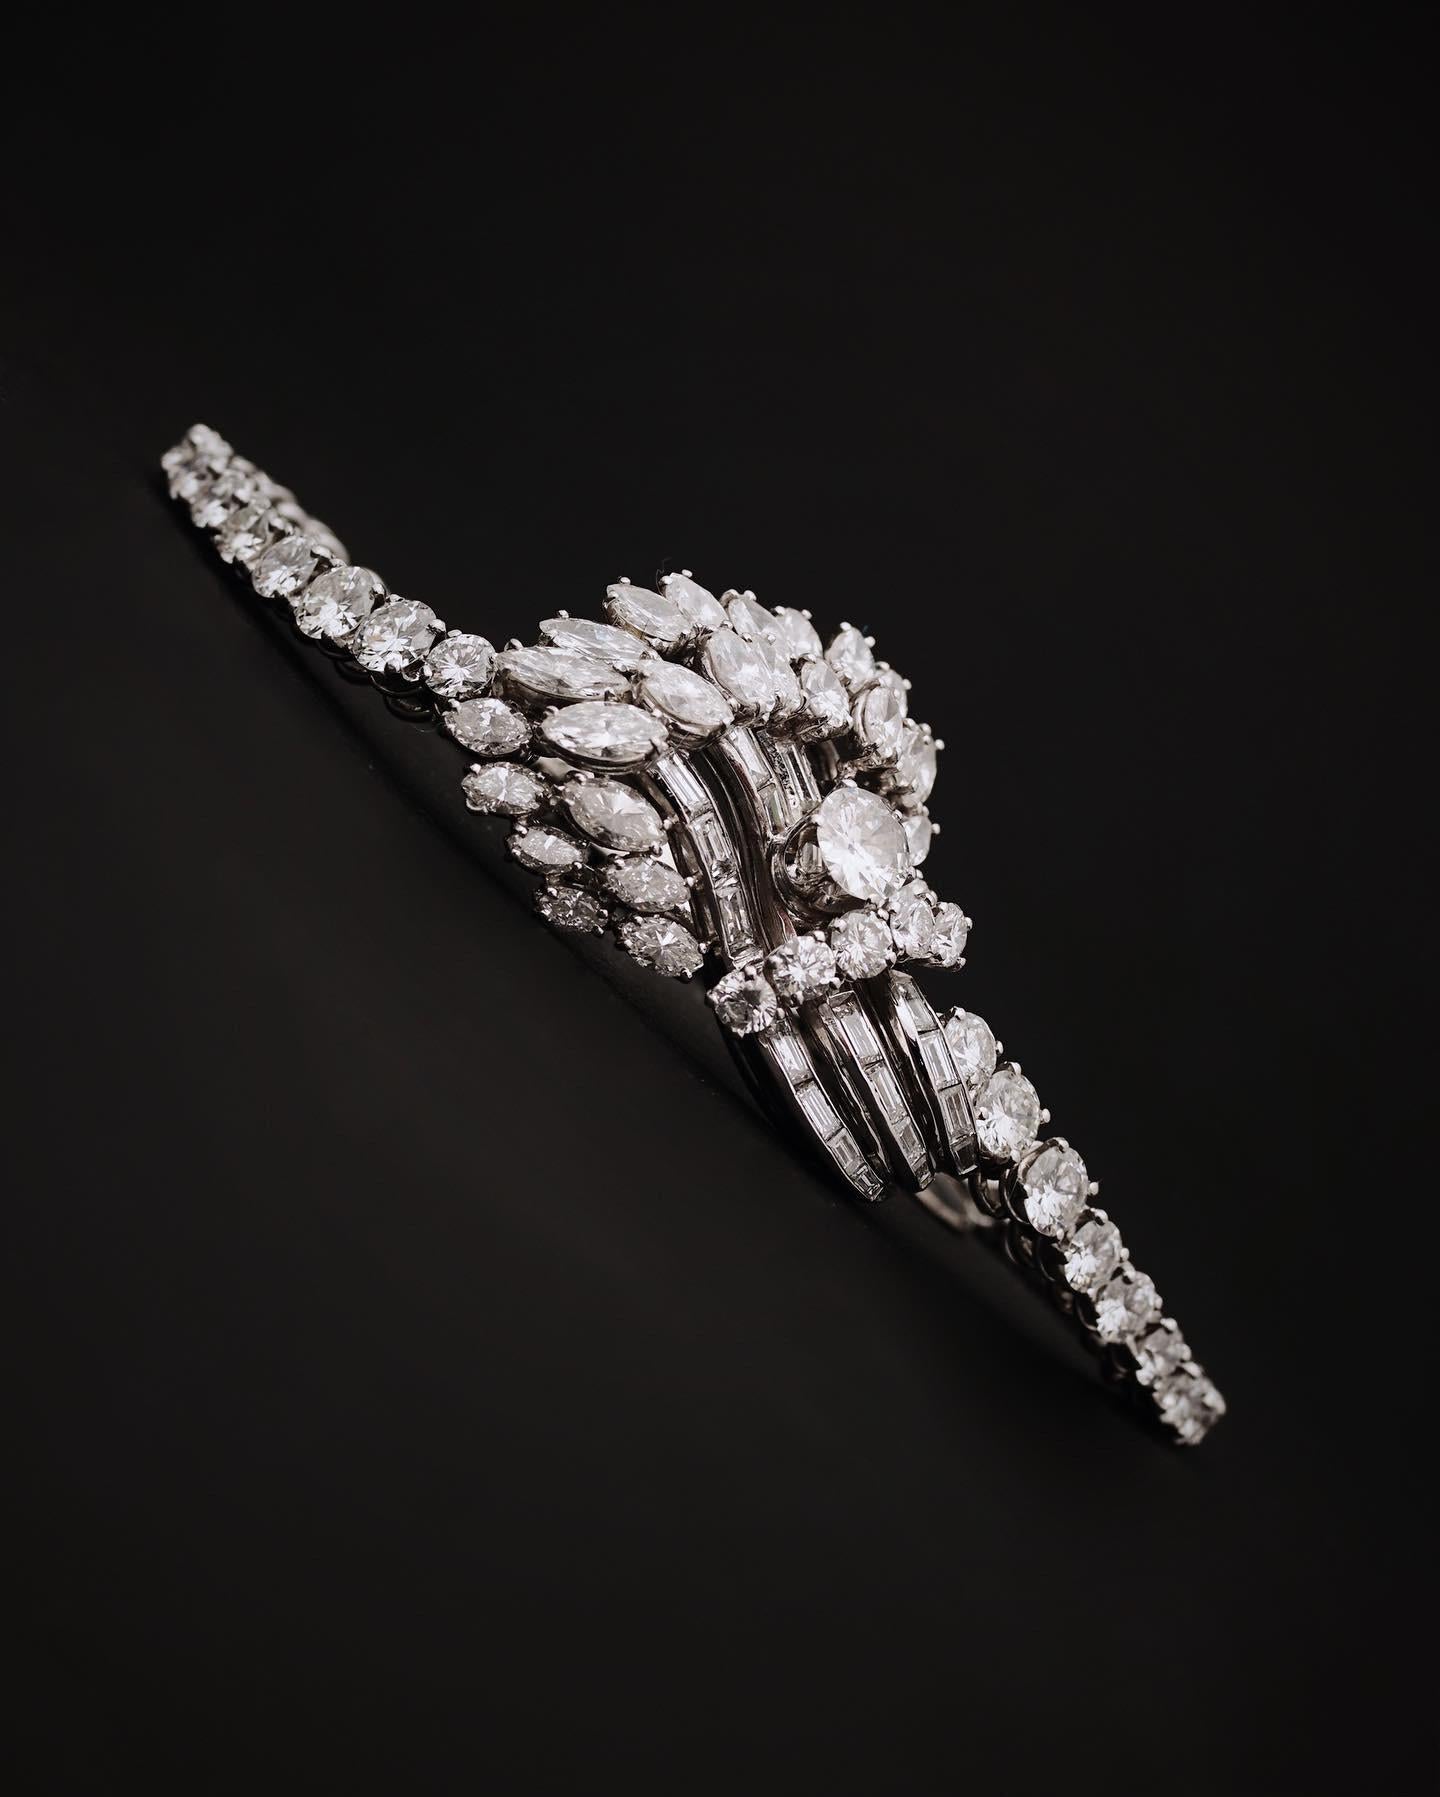 Important Diamond Bracelet and Diamond Brooch
The brooch is set on Platinum with brilliant-cut and baguette diamonds, and the bracelet is embellished with marquise-shaped diamonds (length : 165mm)
Diamonds estimated to weight a total of 17-19